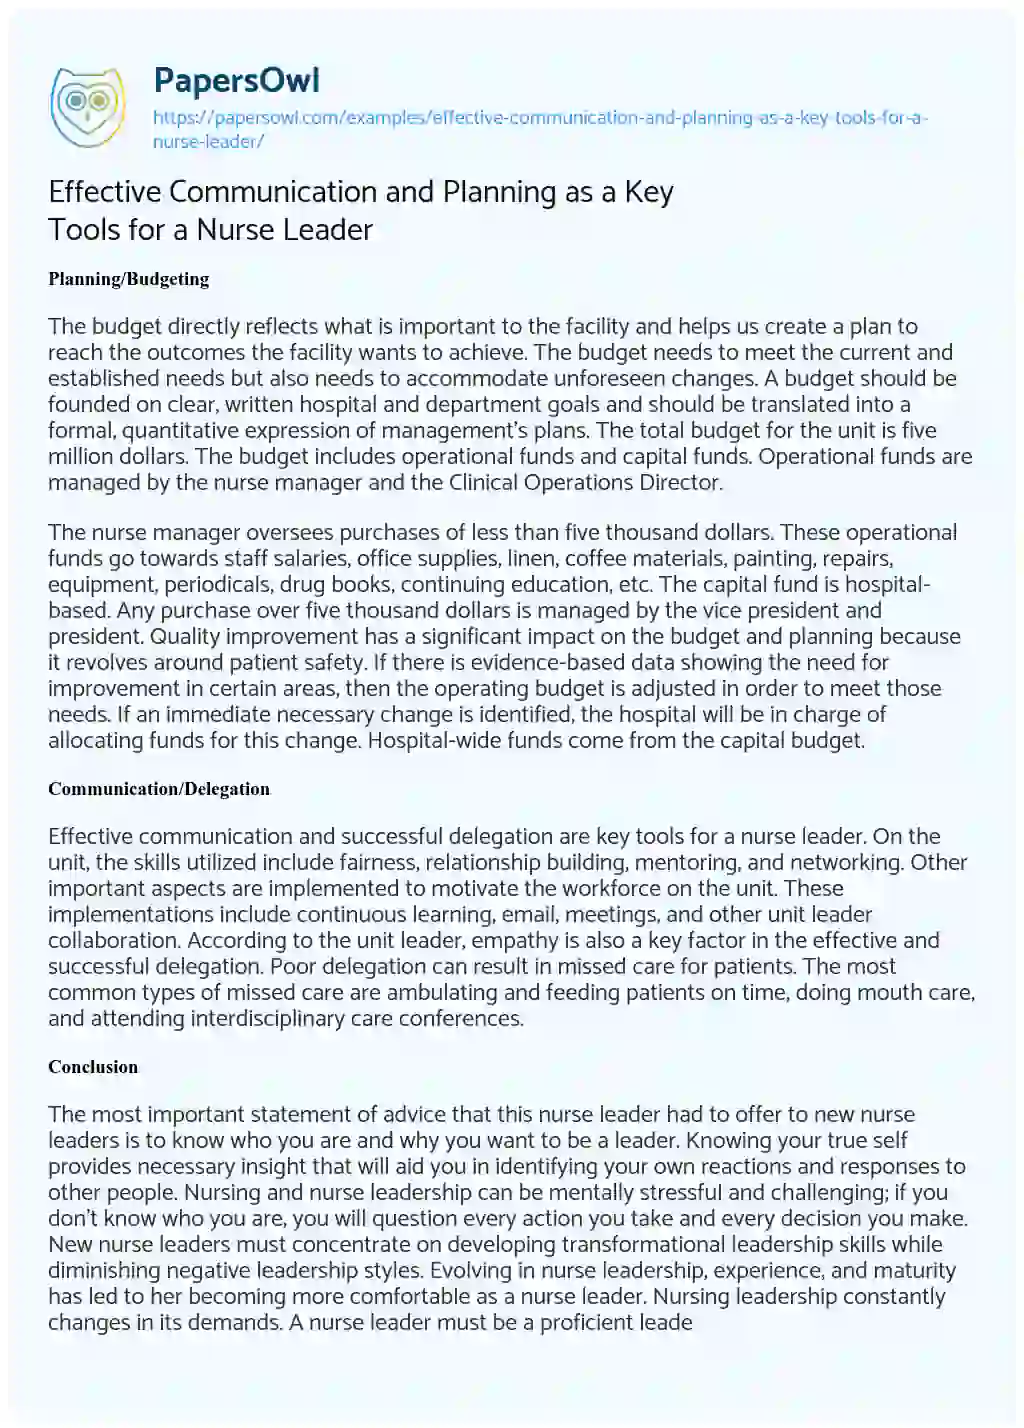 Essay on Effective Communication and Planning as a Key Tools for a Nurse Leader